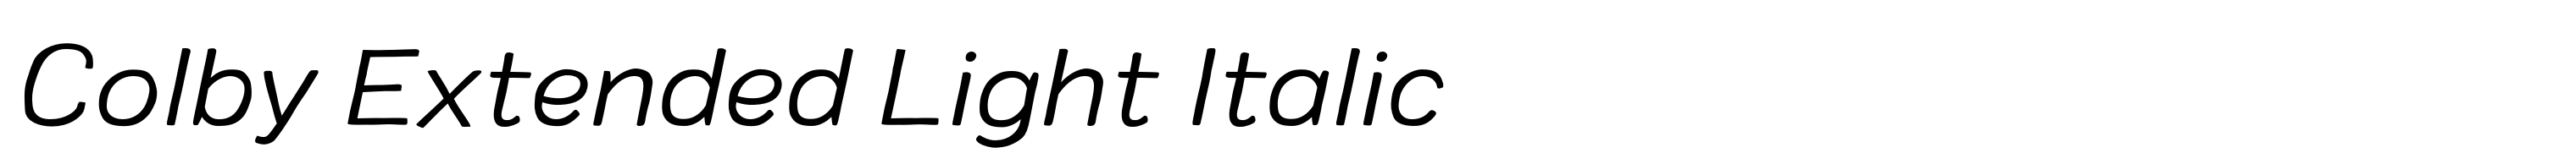 Colby Extended Light Italic